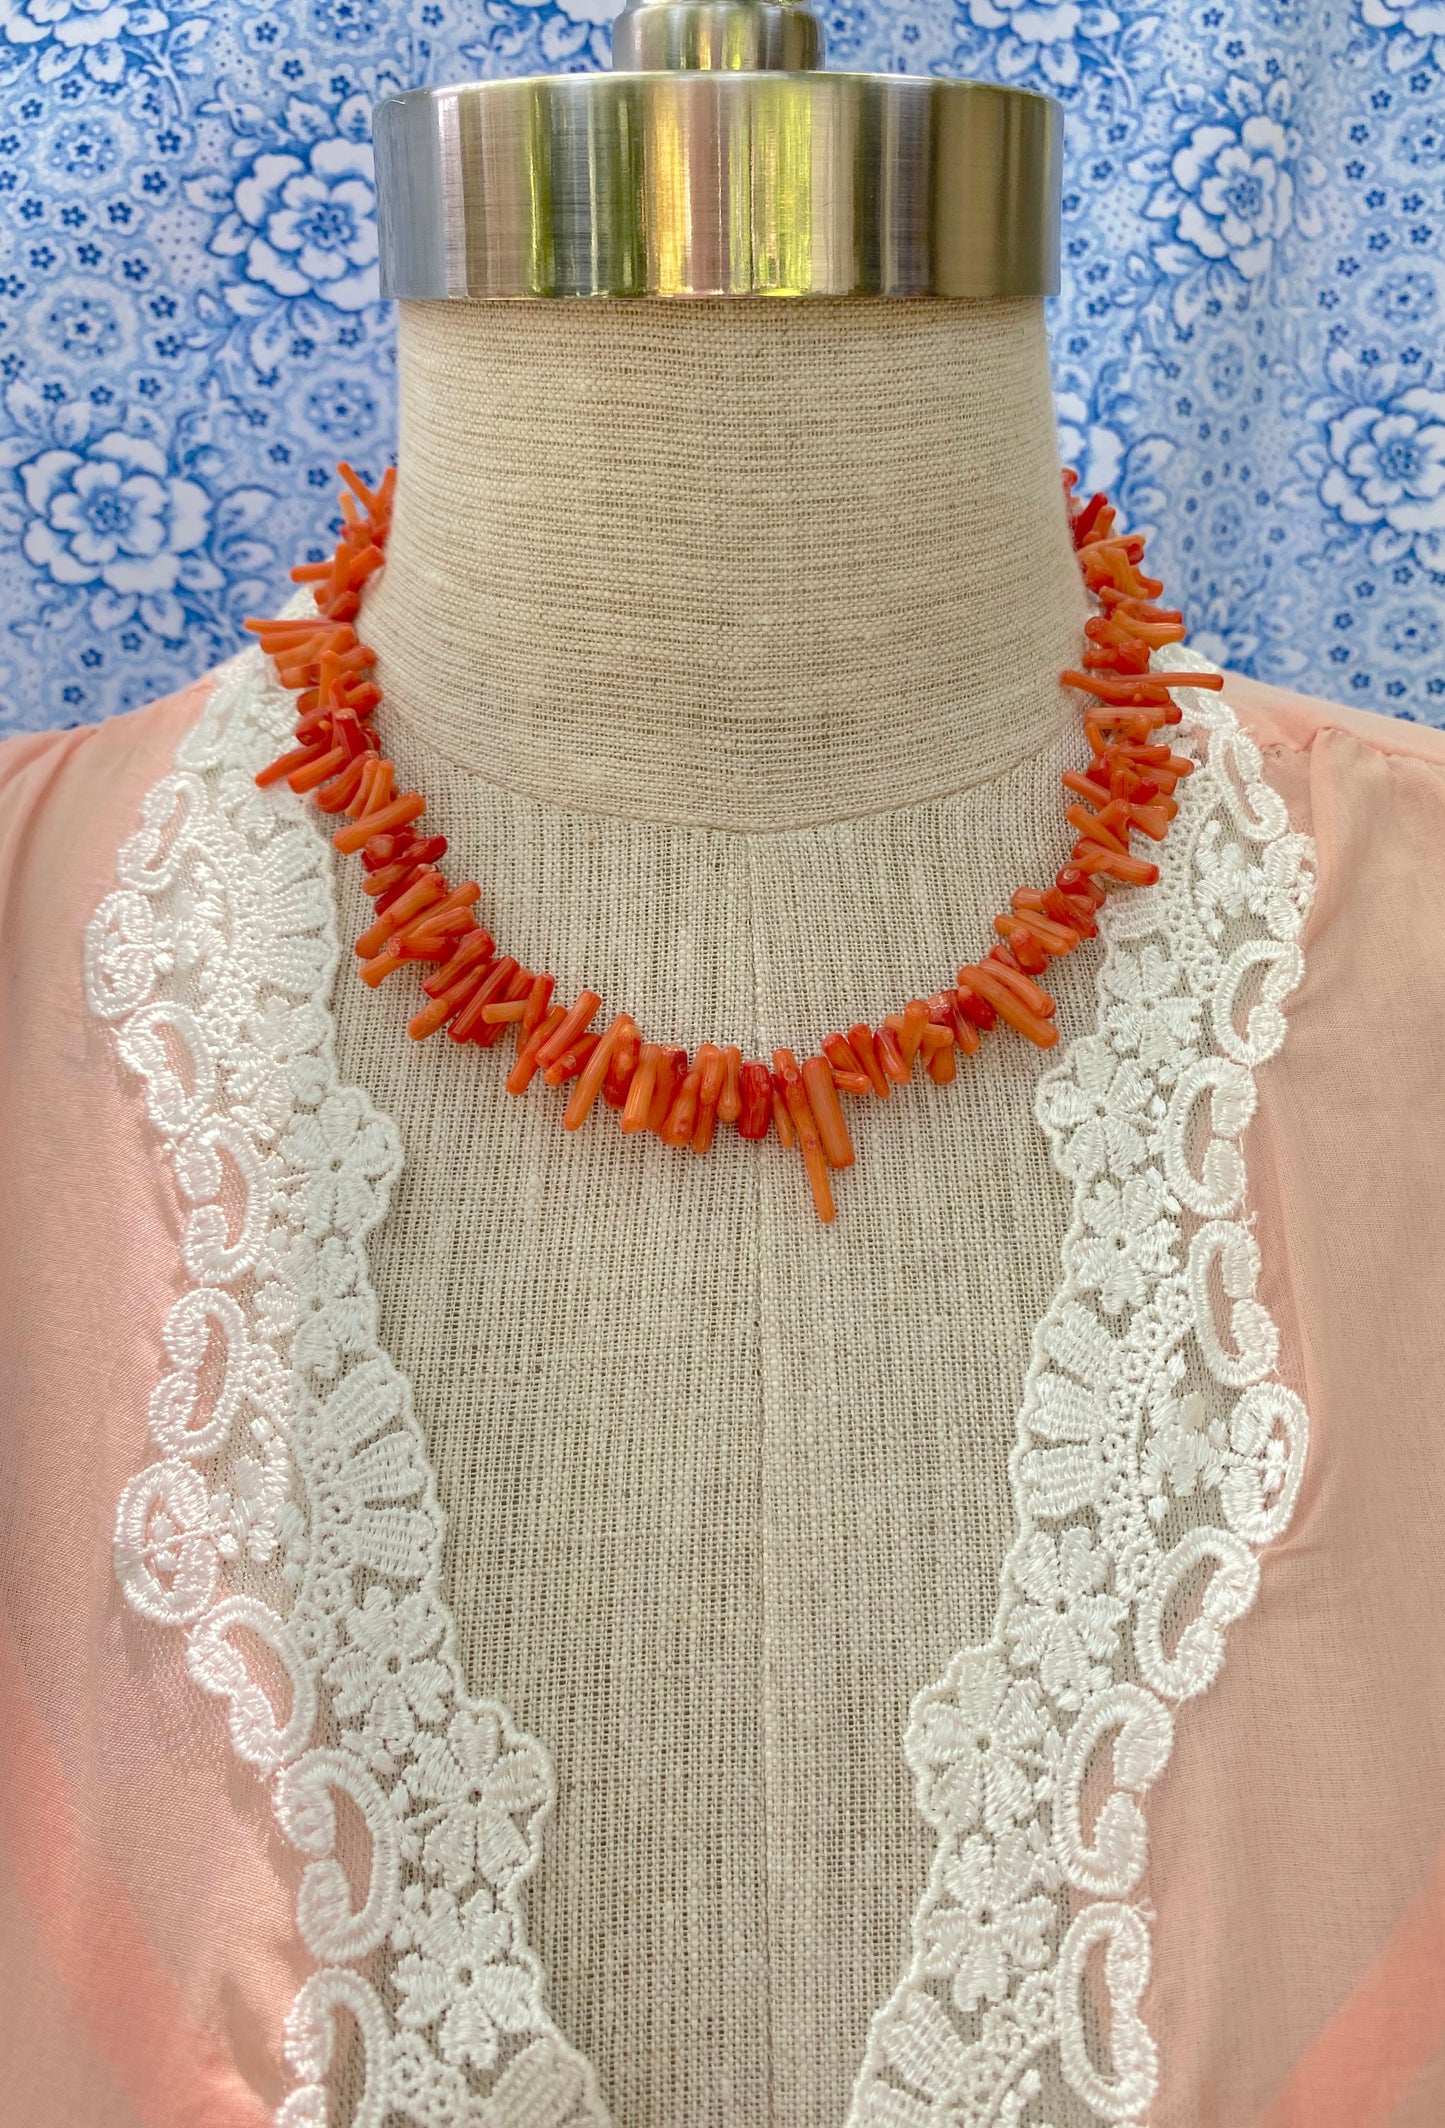 St. Barth Coral Necklace - J. Marin